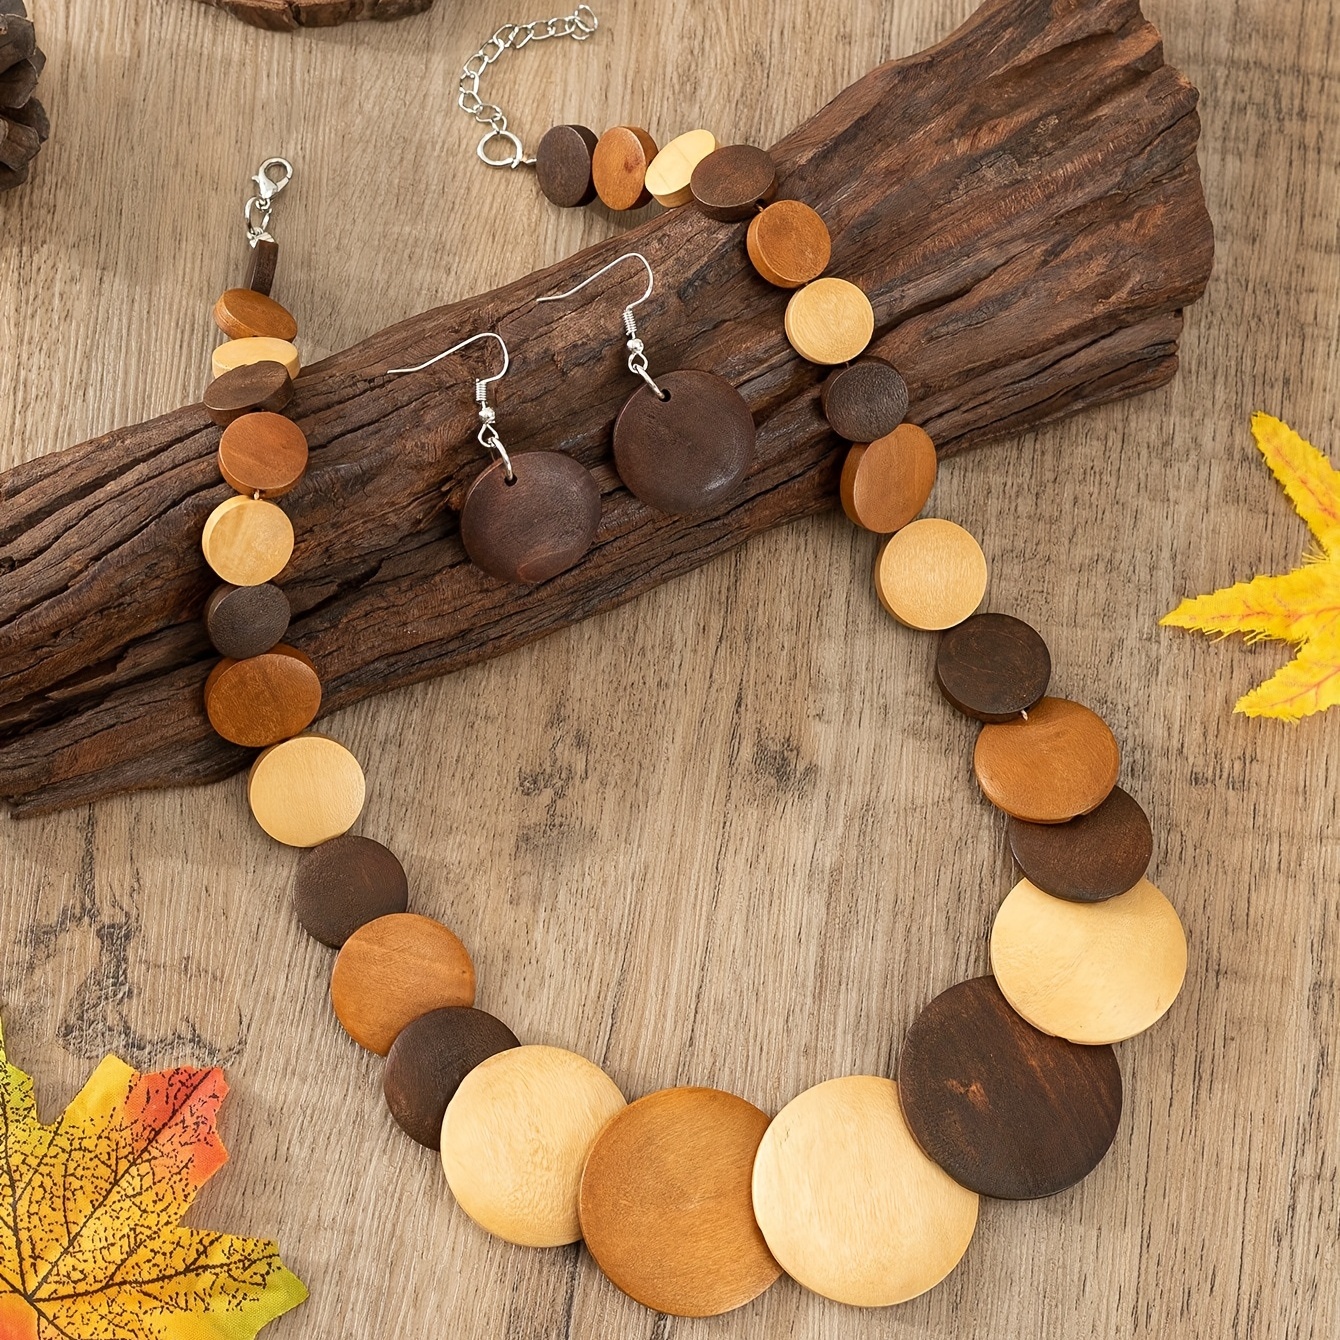 

3pcs Earrings Plus Necklace Boho Style Jewelry Set Made Of Wooden Plate Match Daily Outfits Link To The Mother Nature